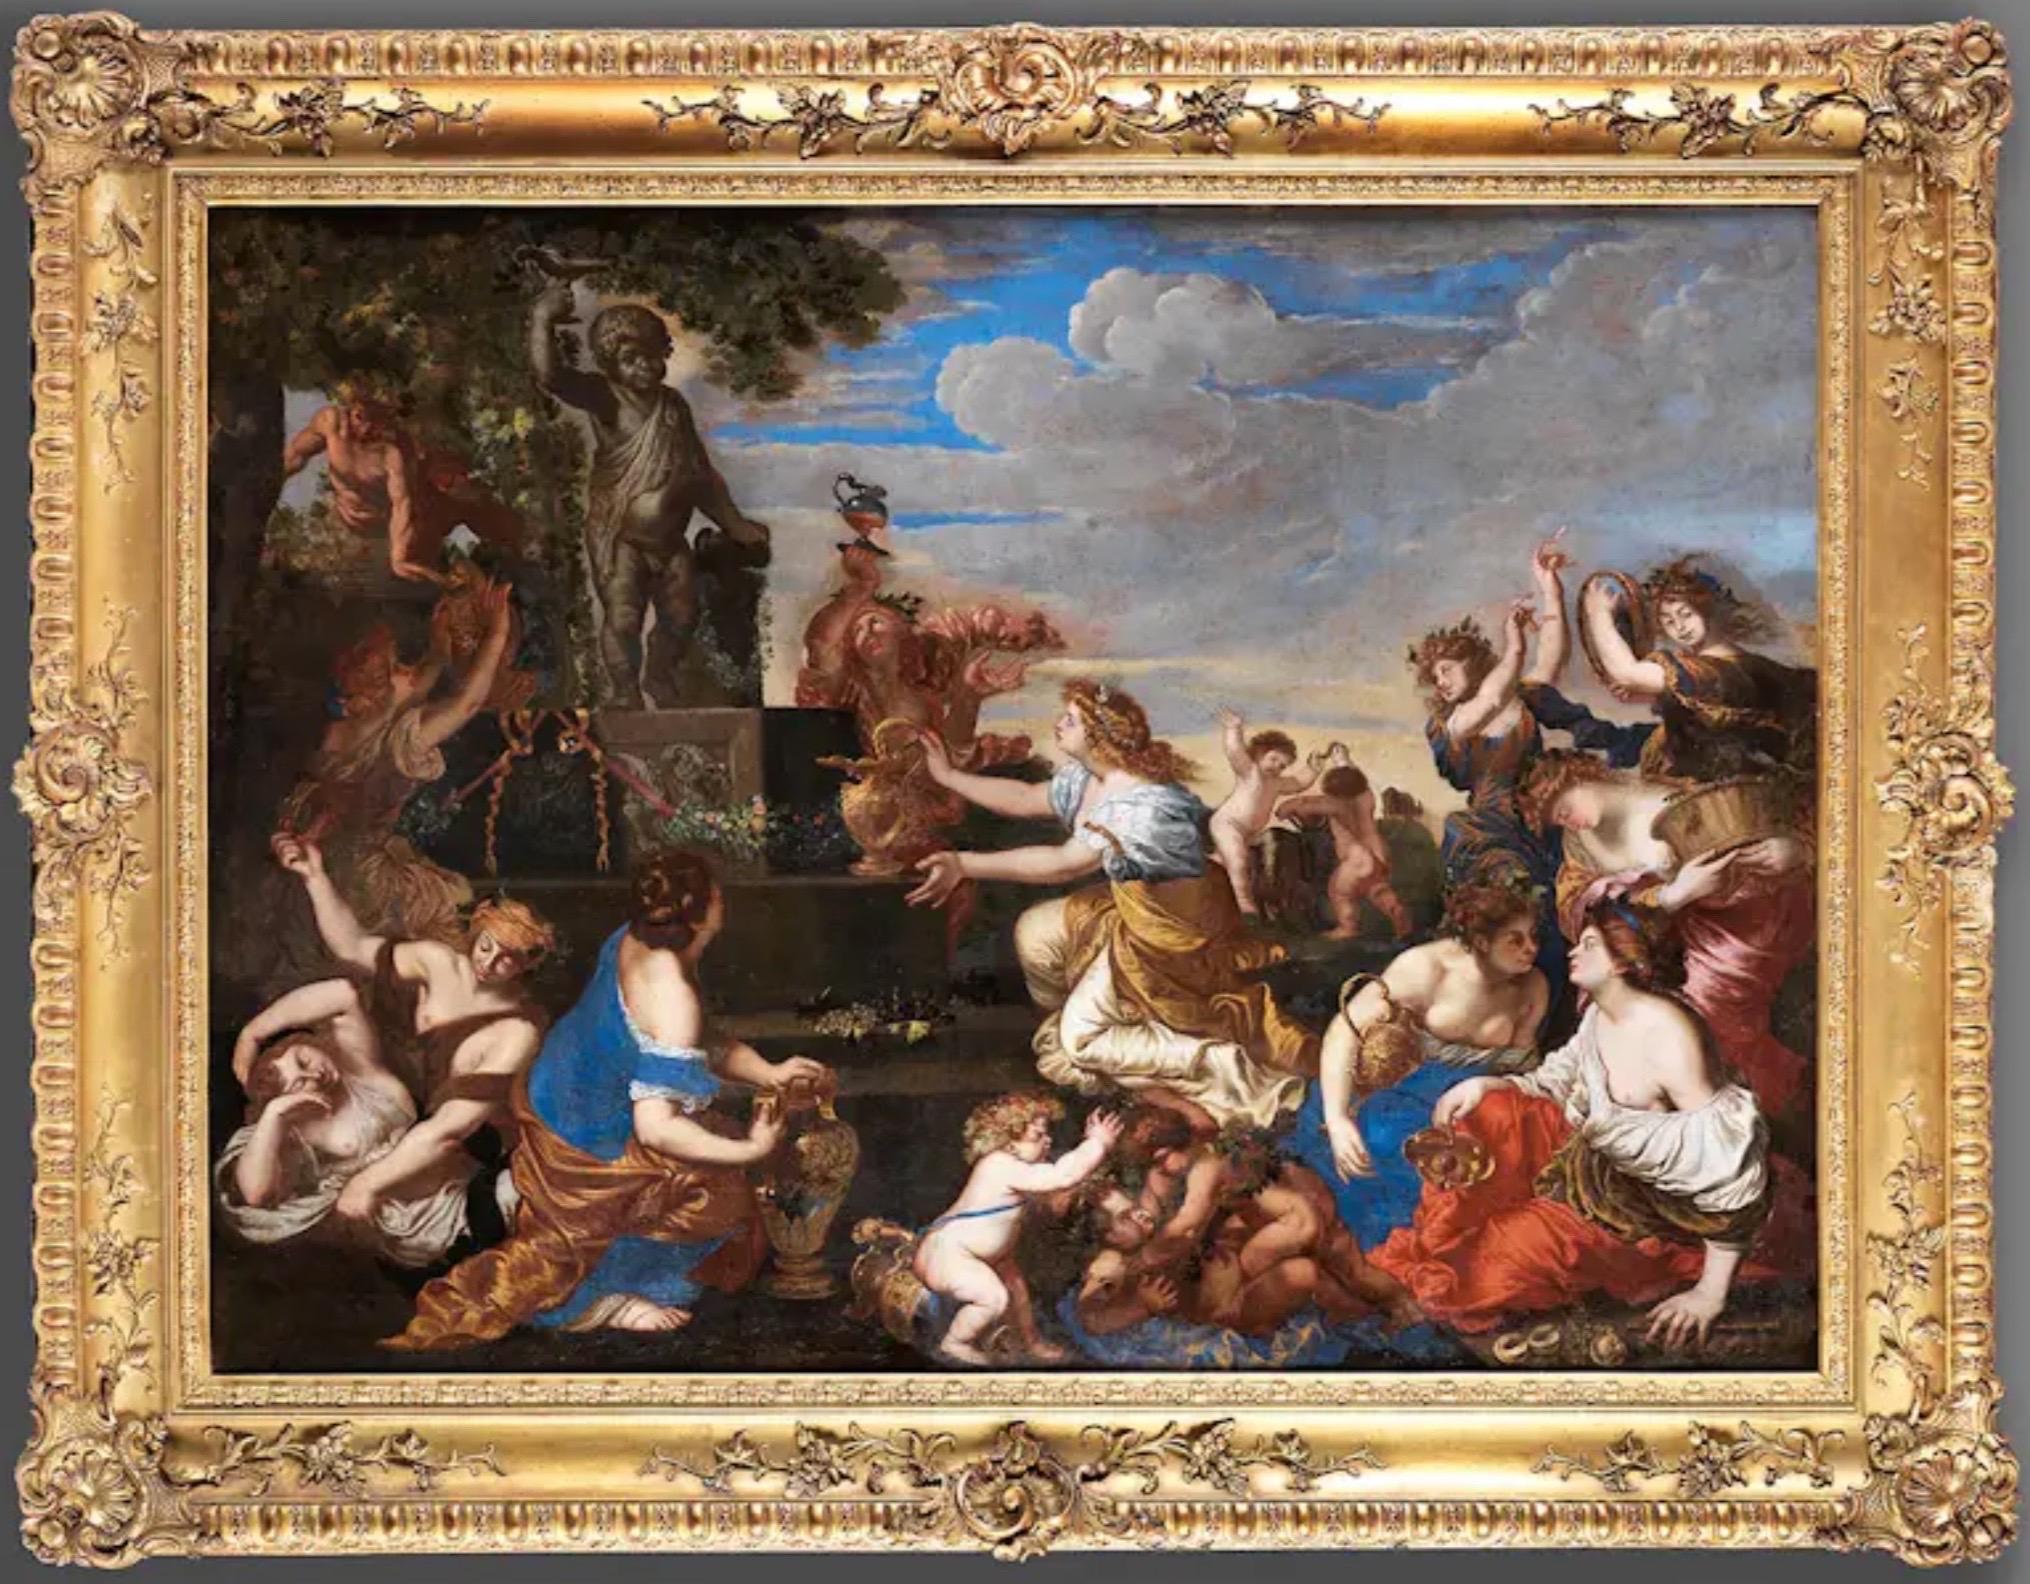 Huge 17th century old master - The feast of Bacchus - celebration Poussin